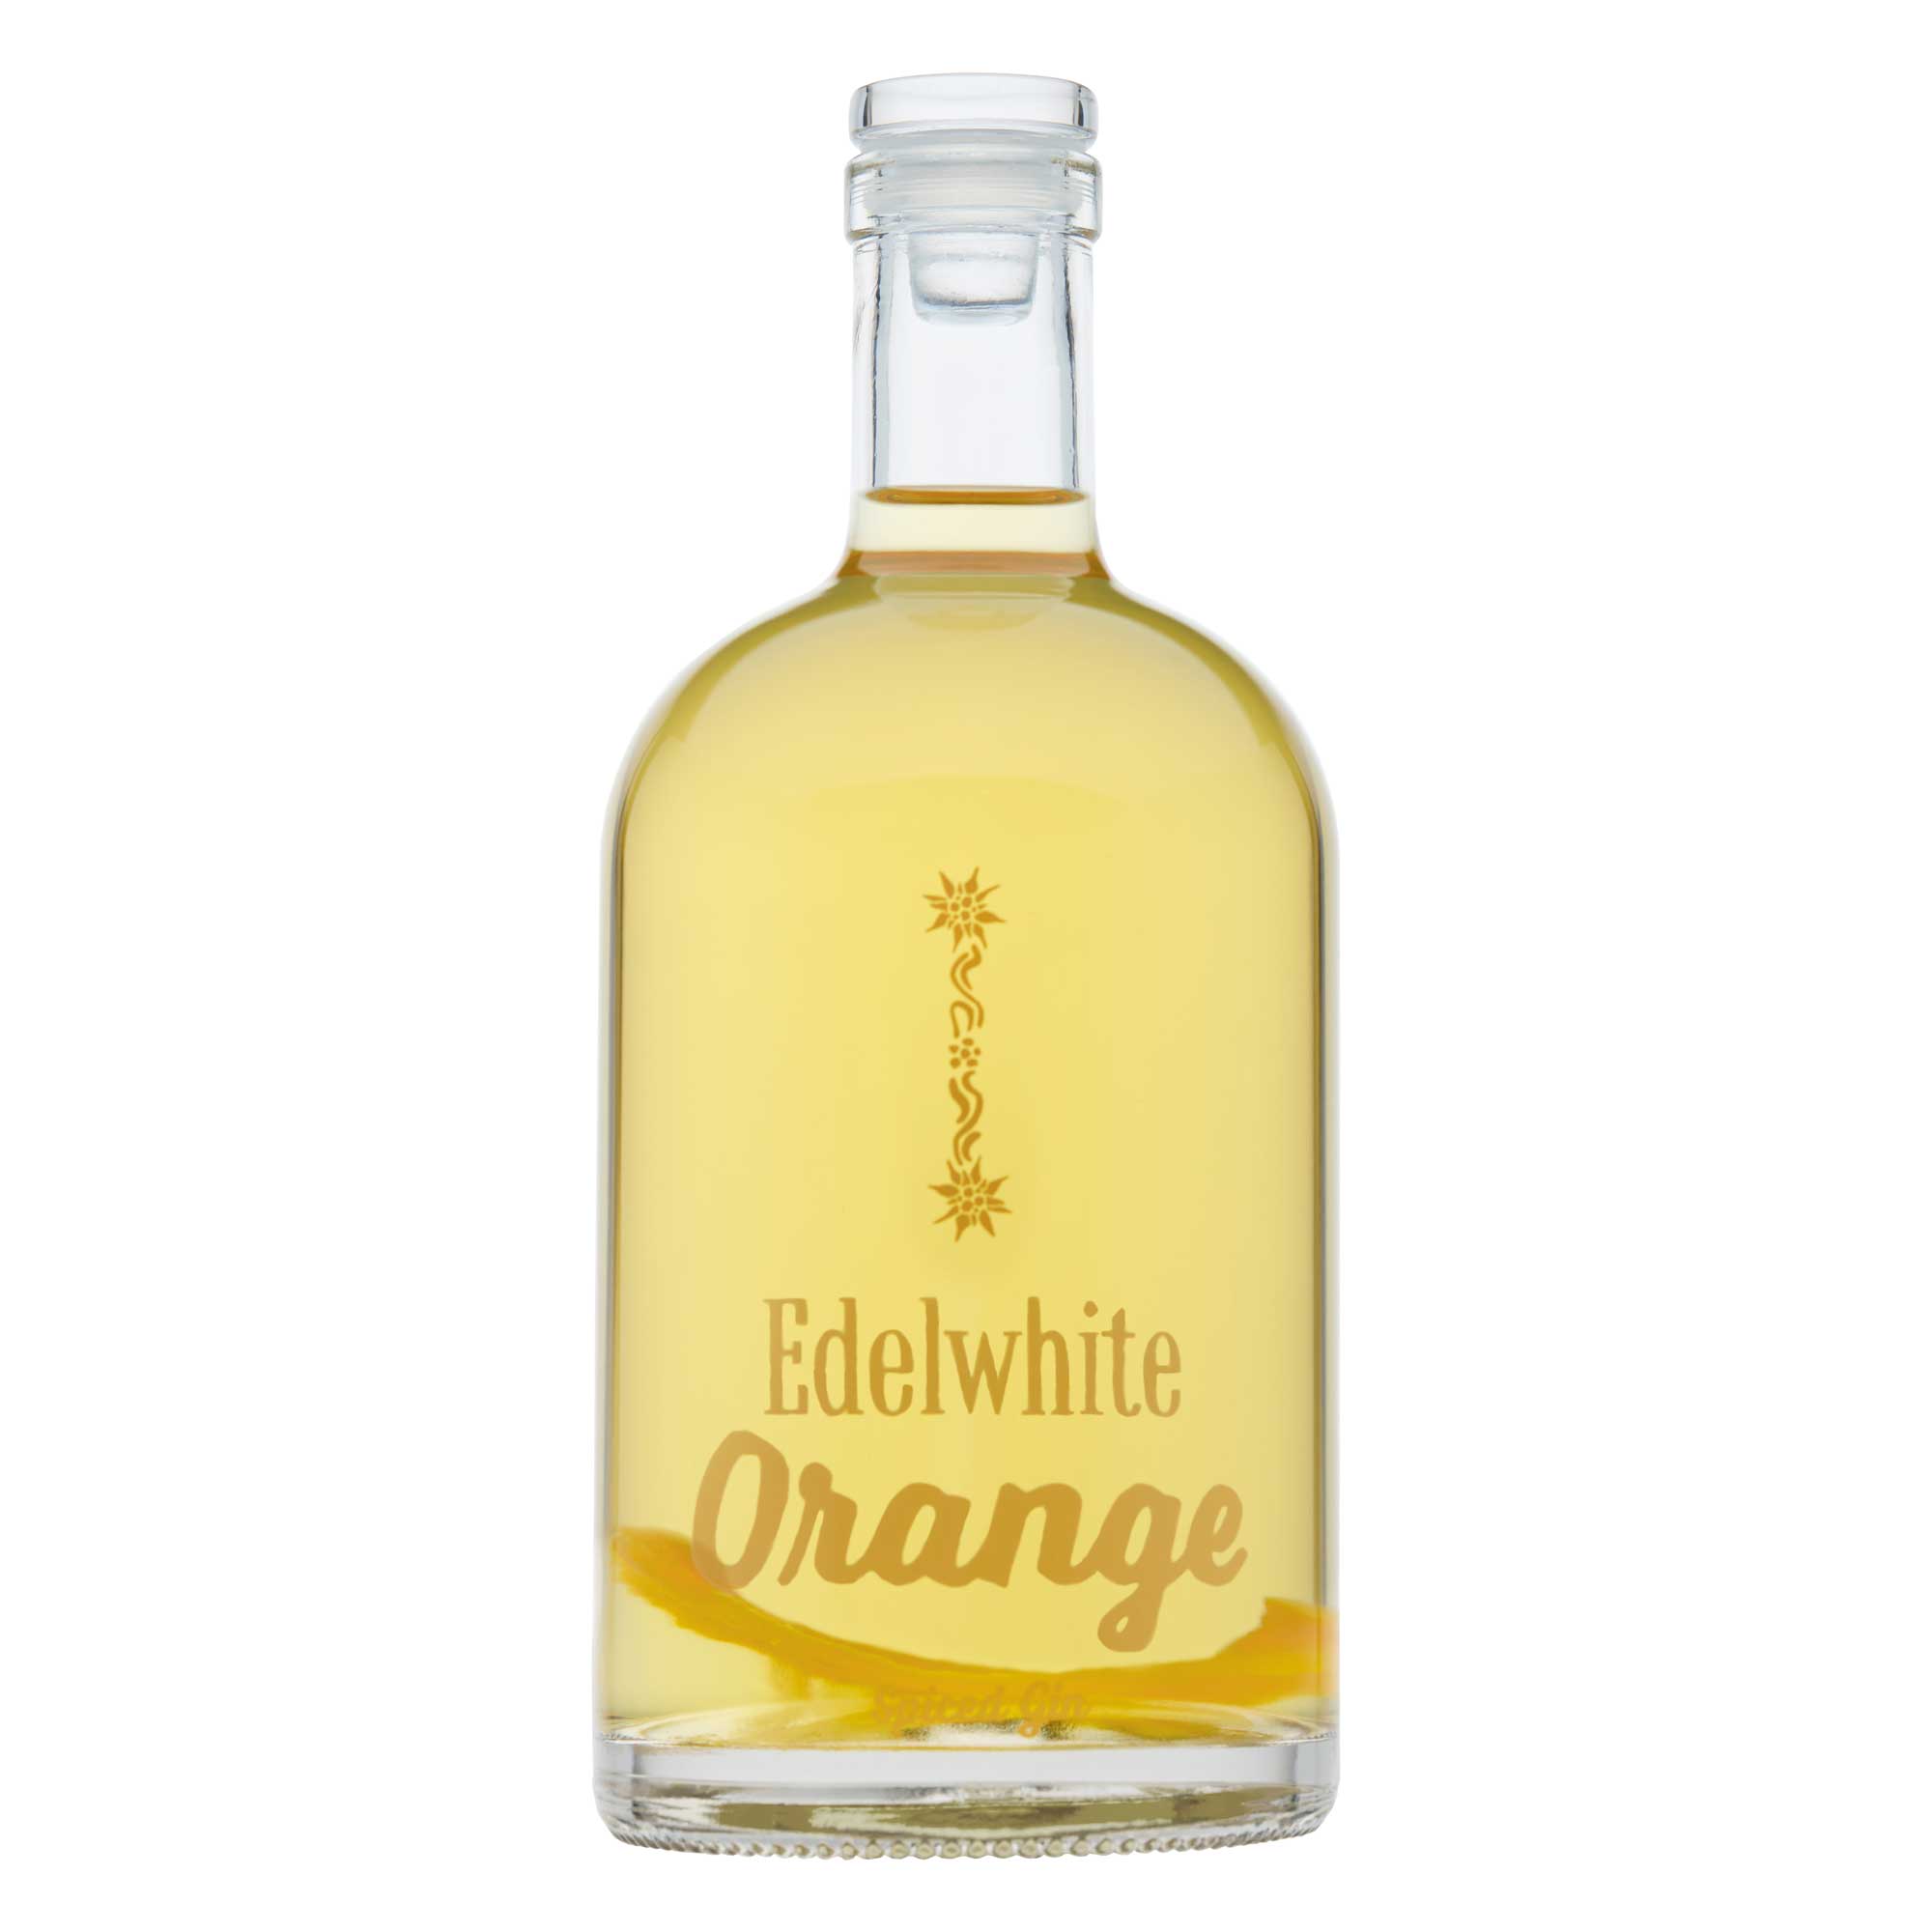 Featured image for “Edelwhite Orange – Spiced Gin (40%vol)”